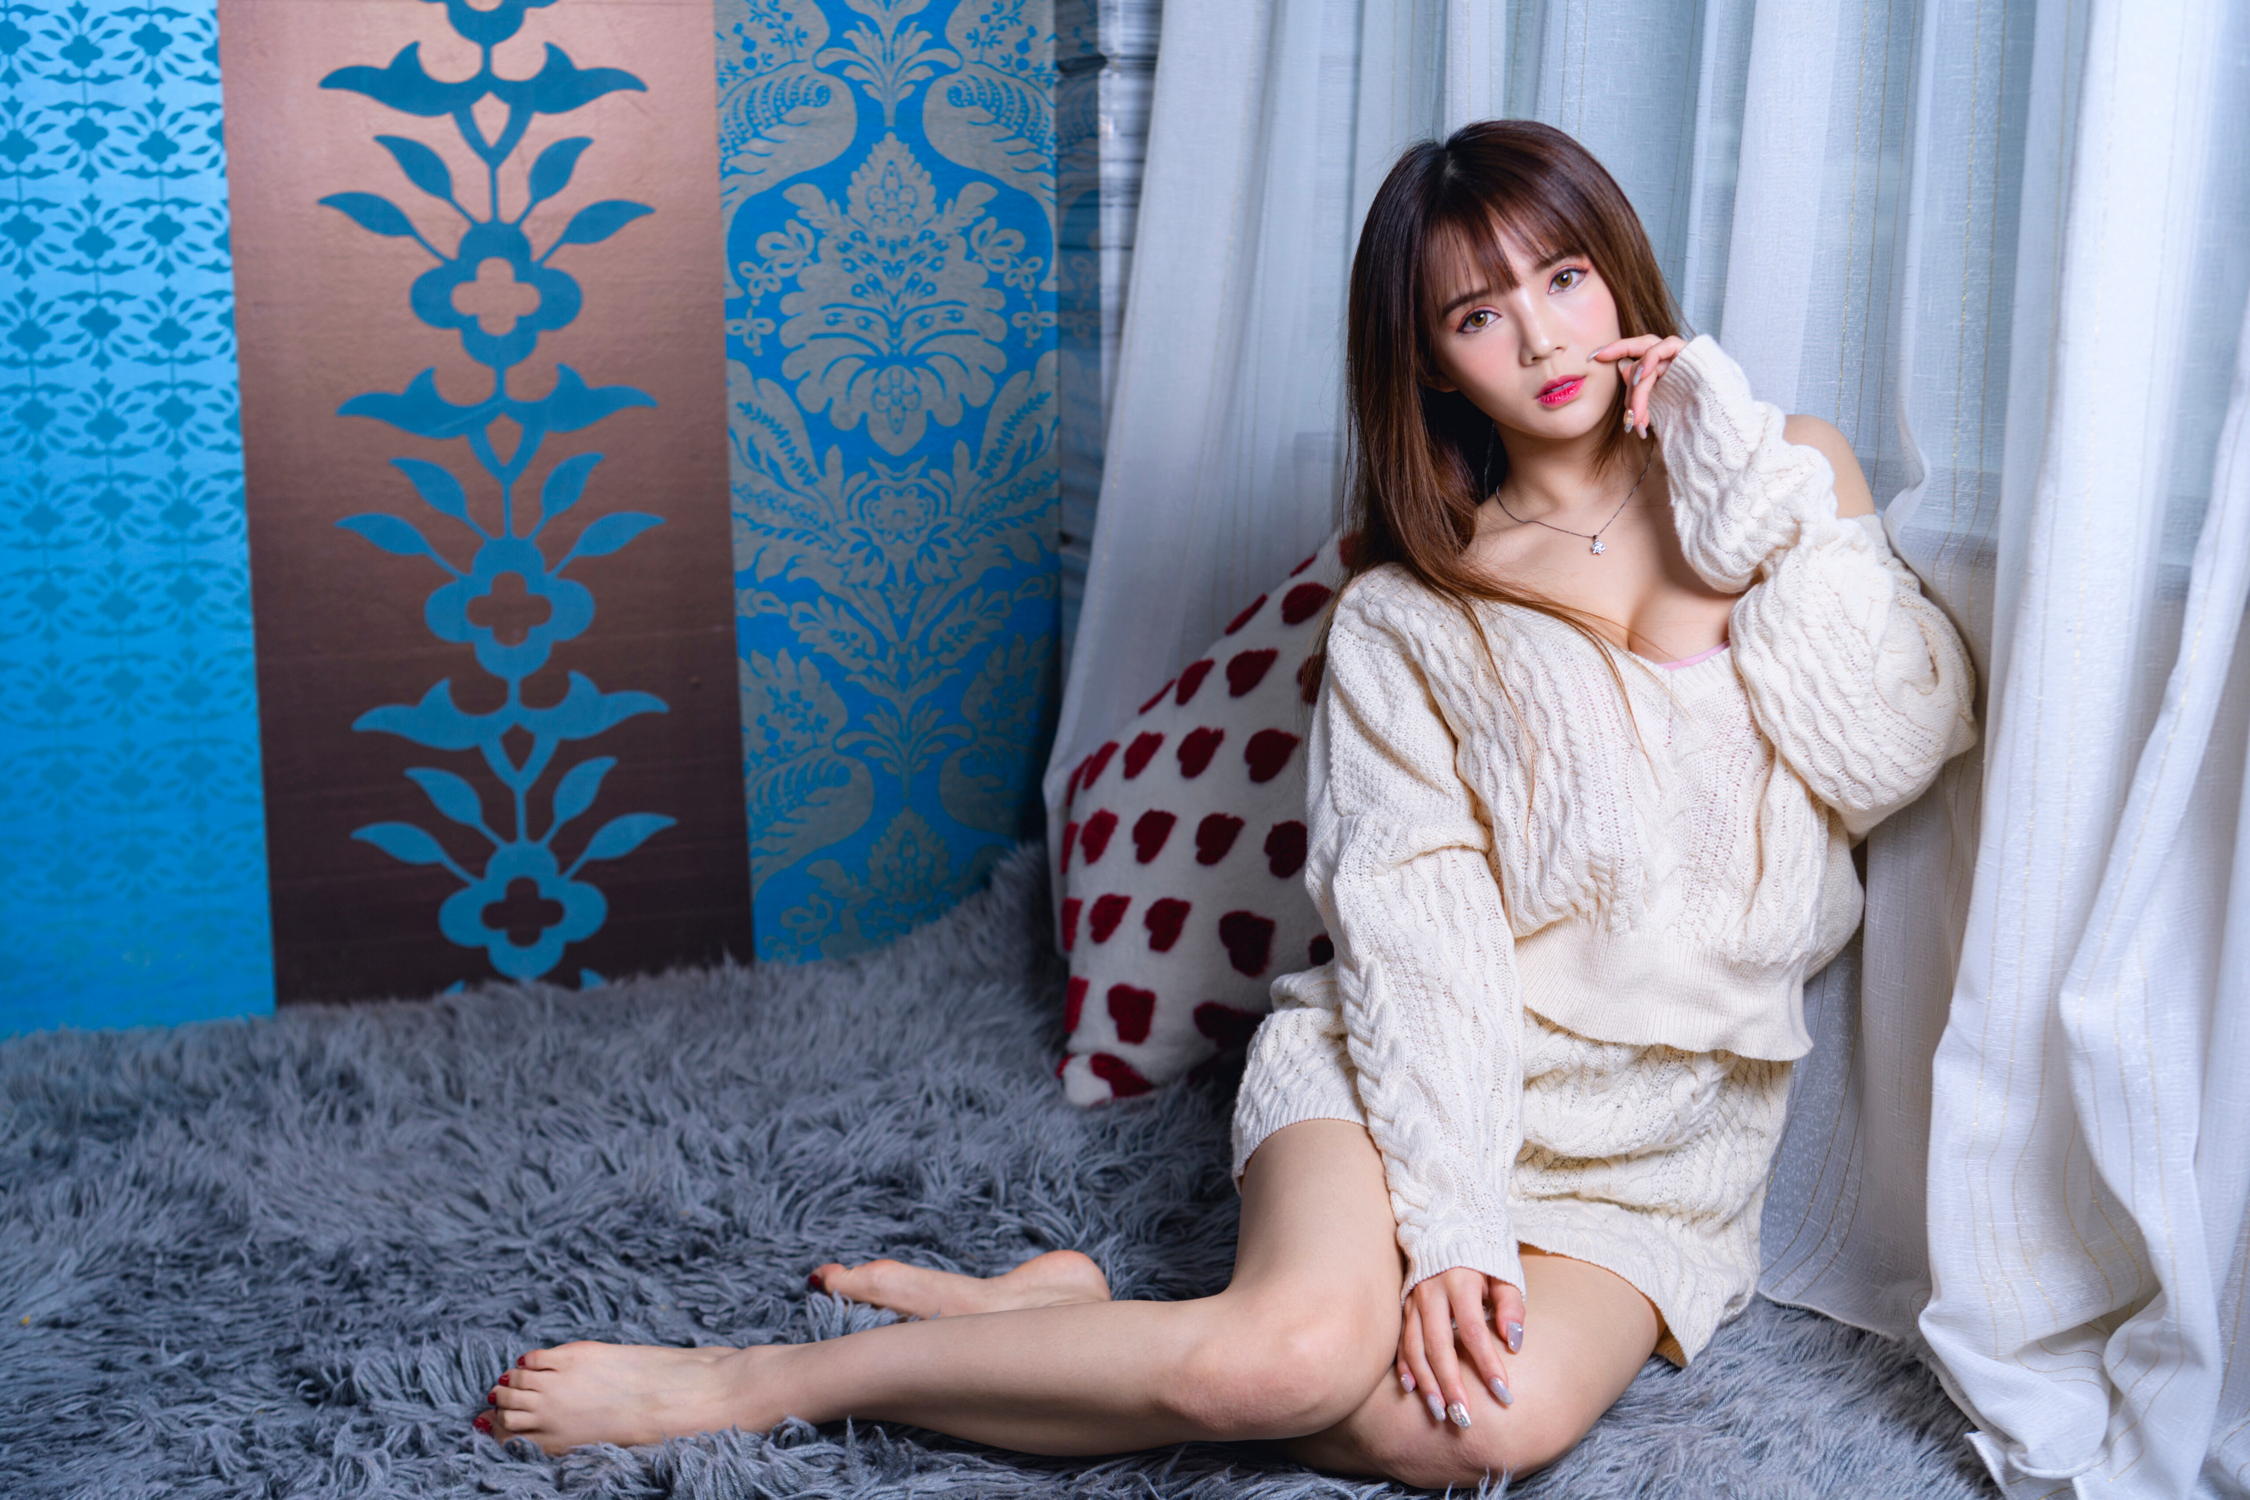 People 2250x1500 Asian model women long hair dark hair sitting carpet pillow curtains barefoot pullover necklace cleavage skirt